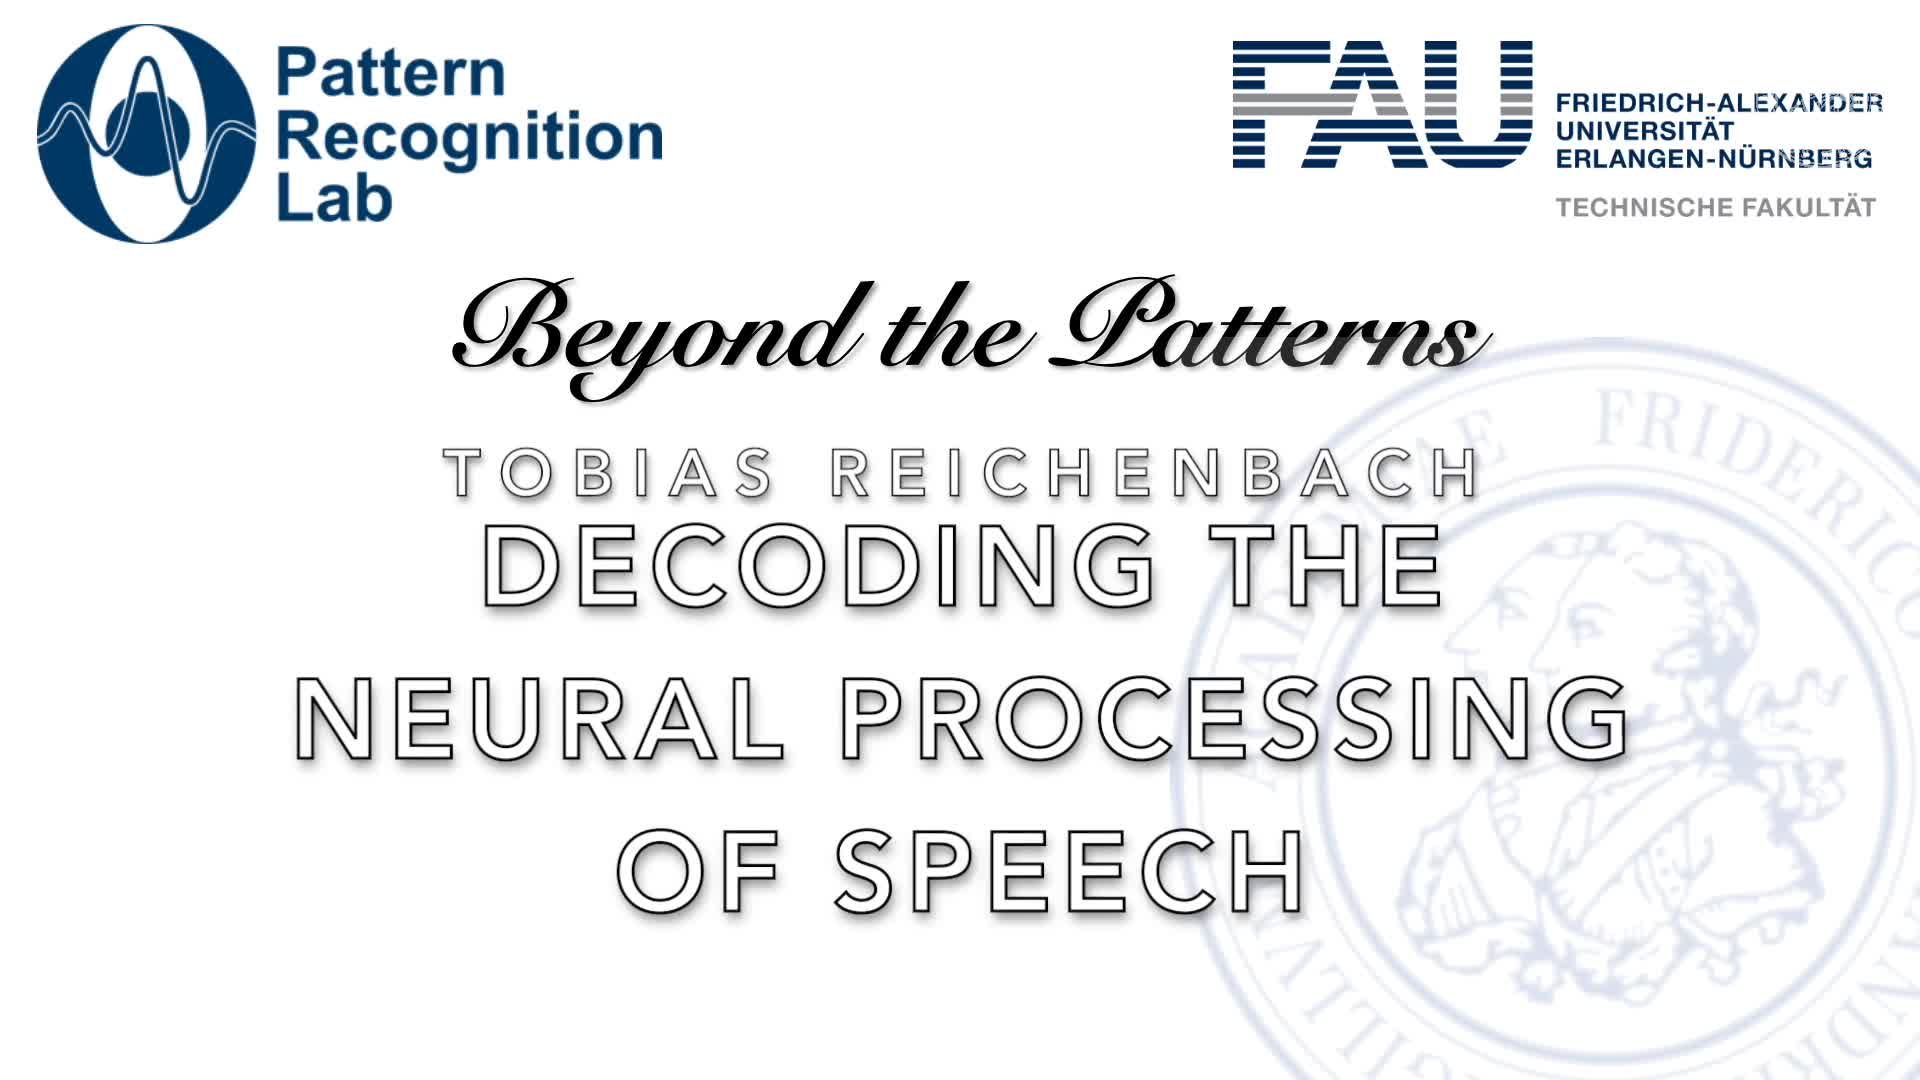 Beyond the Patterns - Tobias Reichenbach - Decoding the Neural Processing of Speech preview image